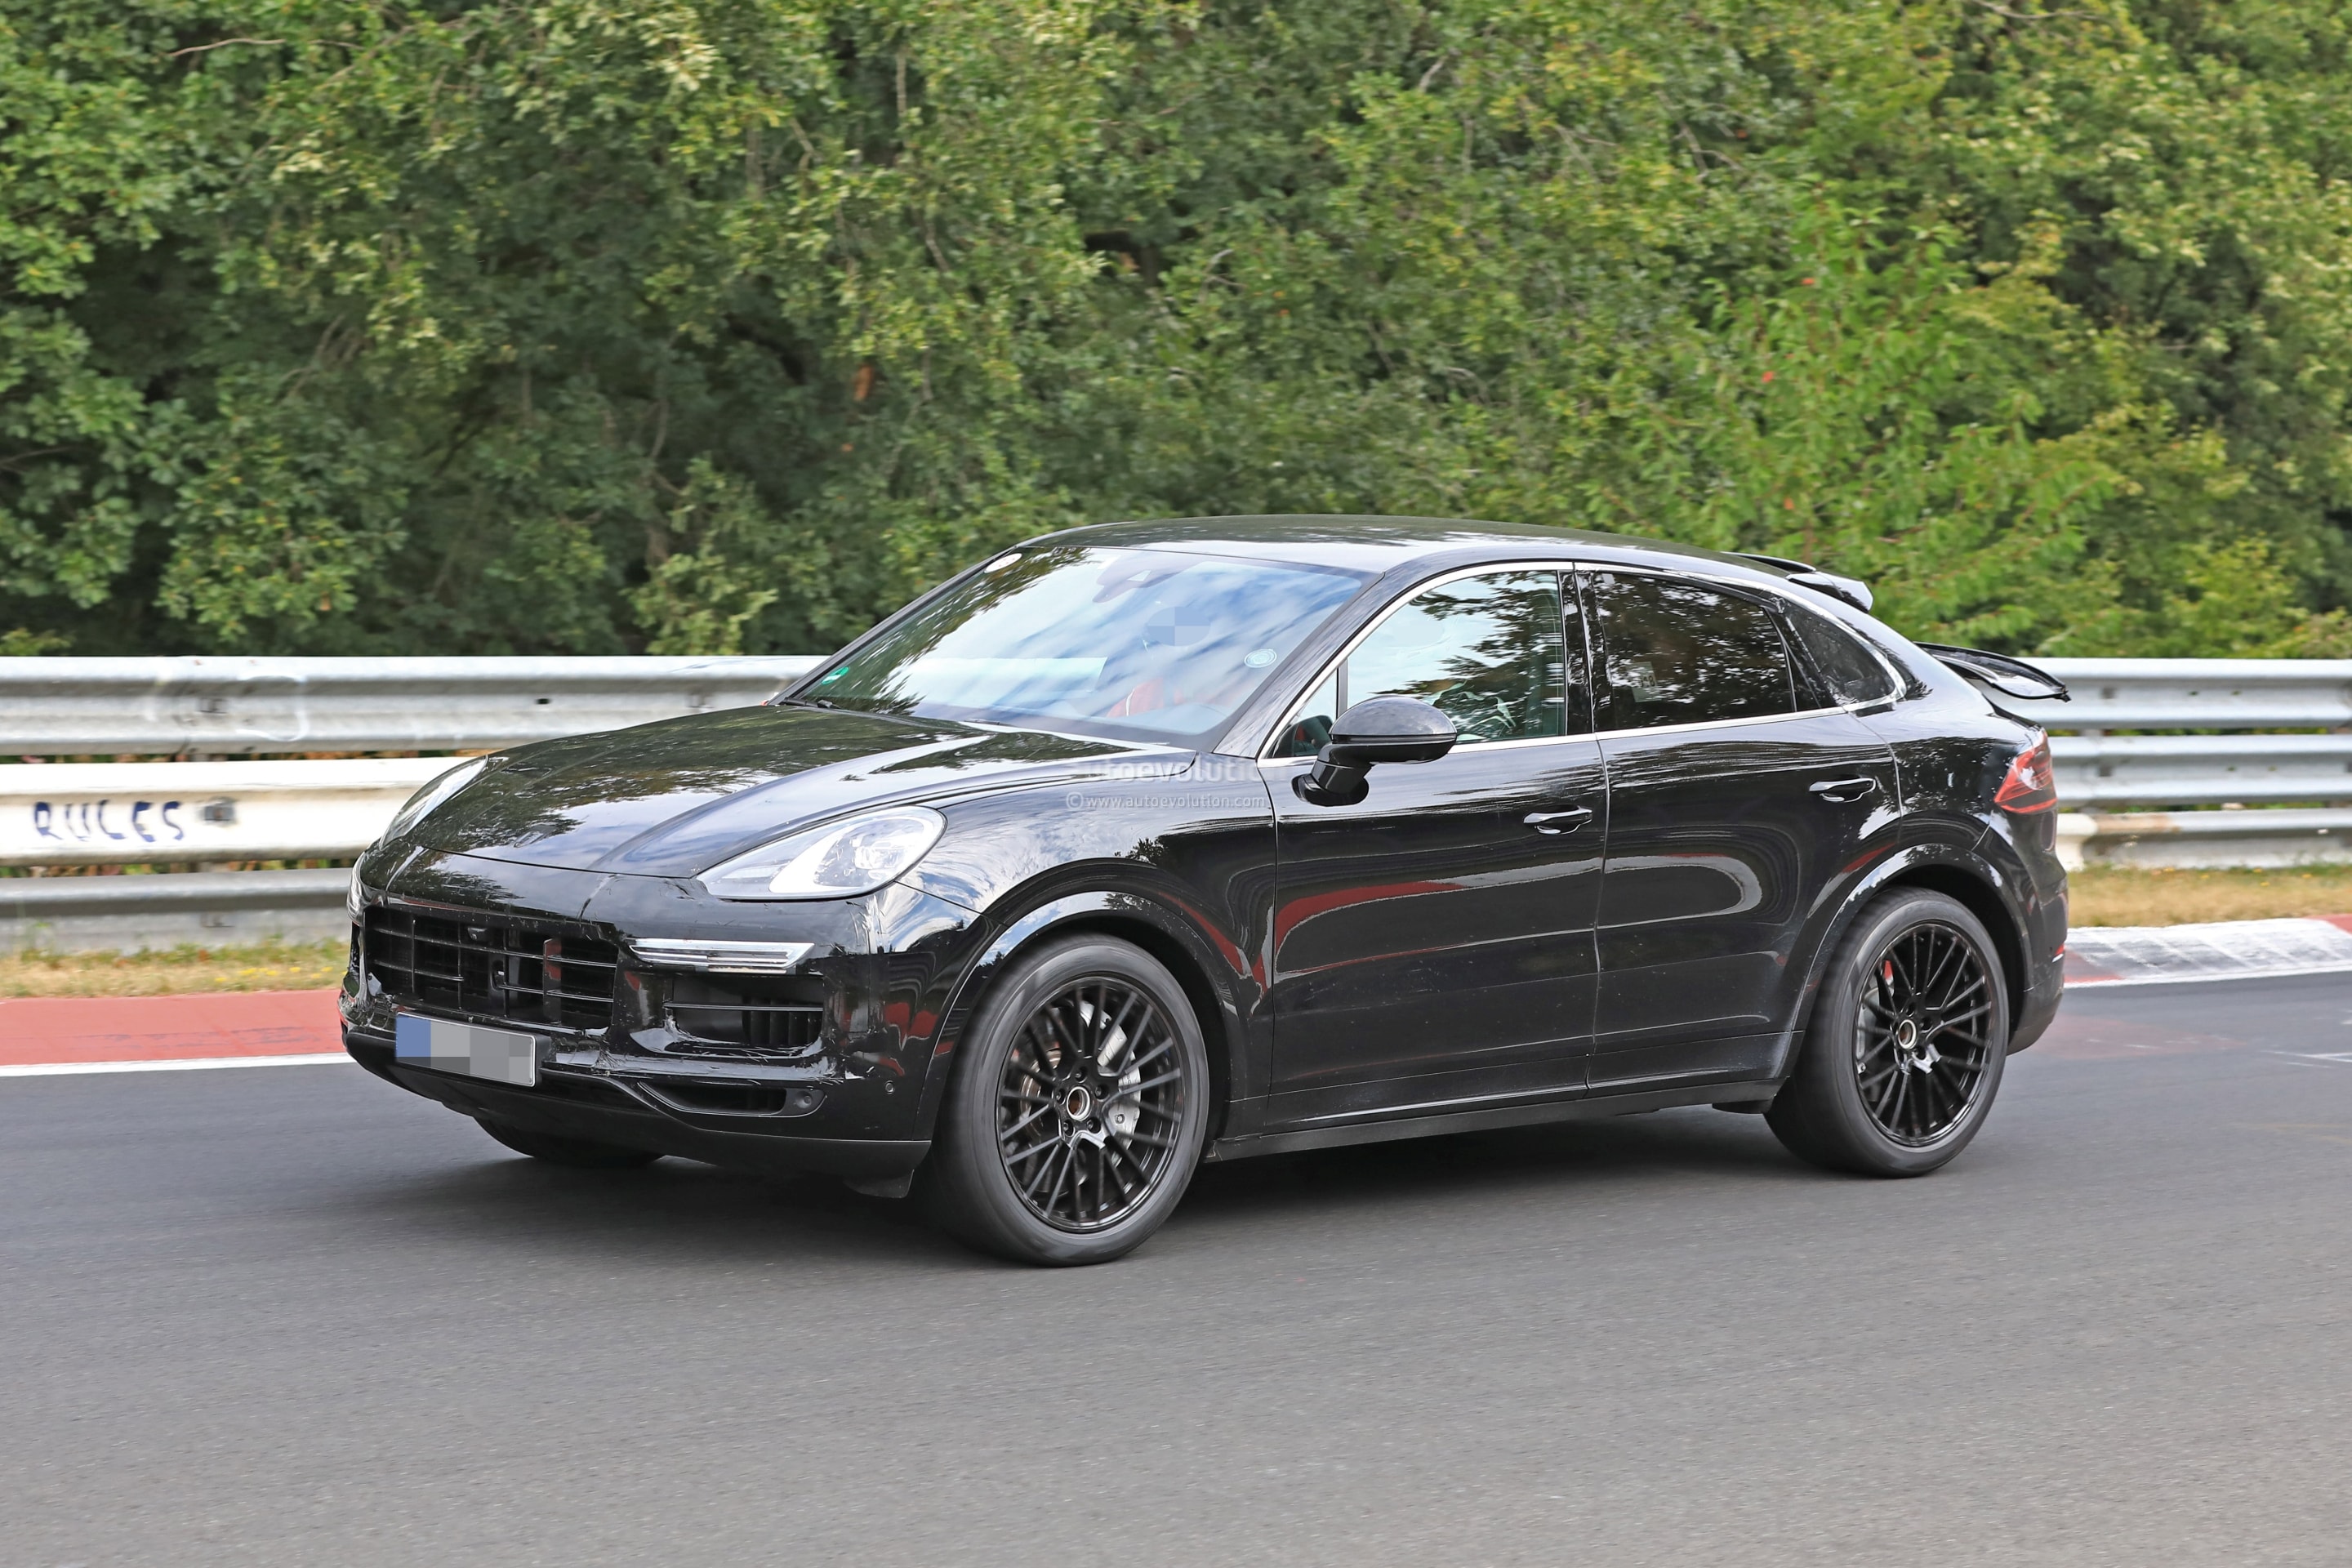 2020 Porsche Cayenne Coupe Hits Nurburgring, Prototype Shows Active